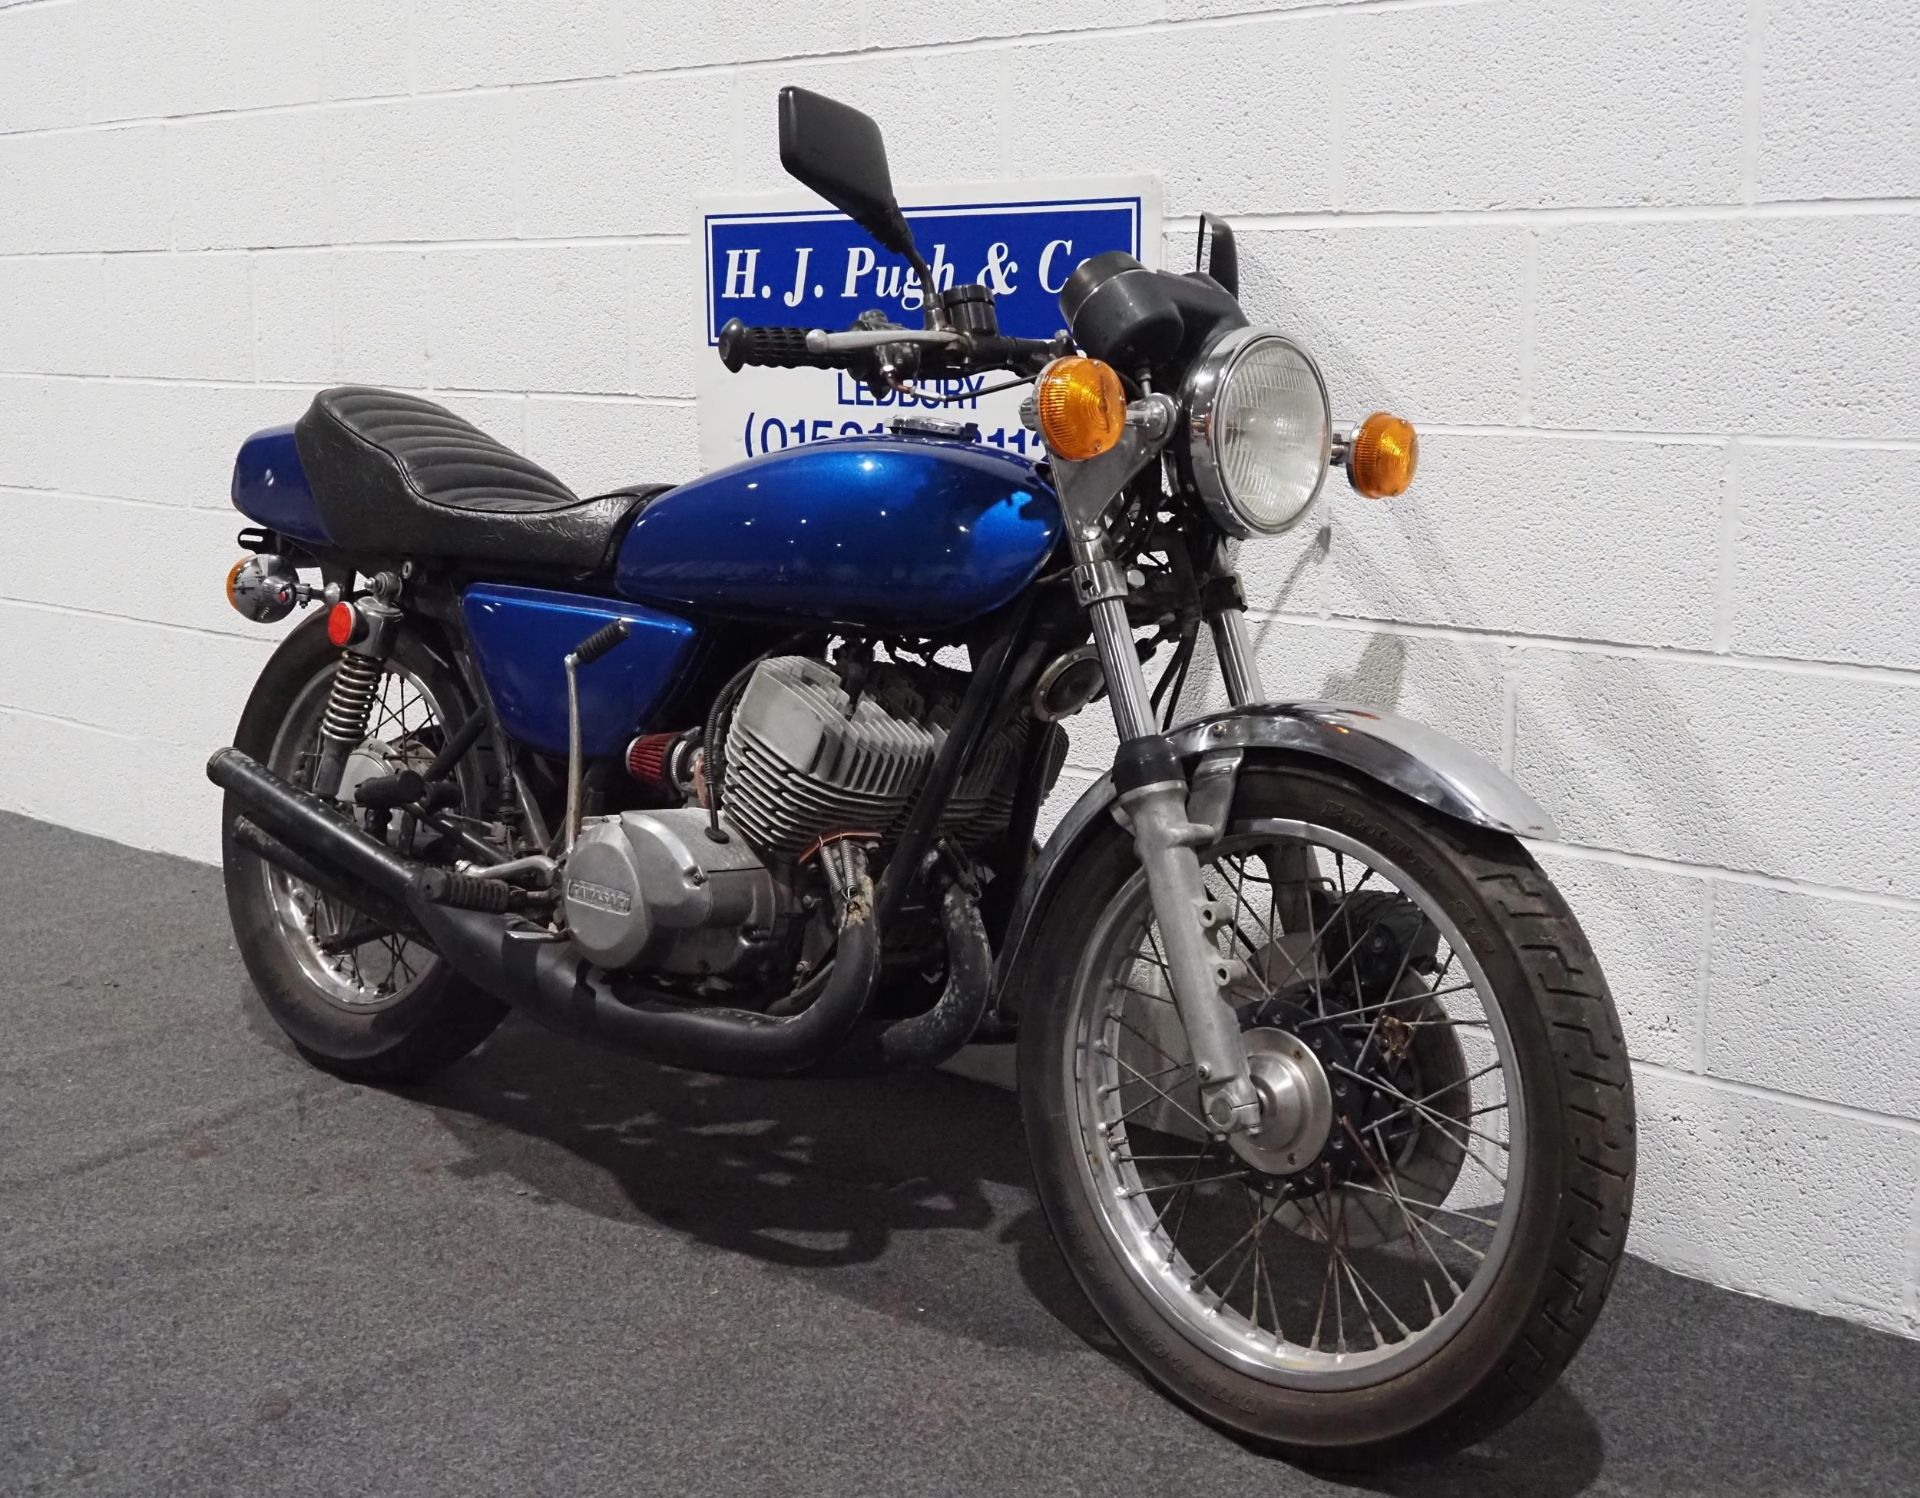 Kawasaki H2 motorcycle, 1975, 750cc Frame no. H2F44394 Engine no. H2E44691 From a deceased estate, - Image 2 of 6